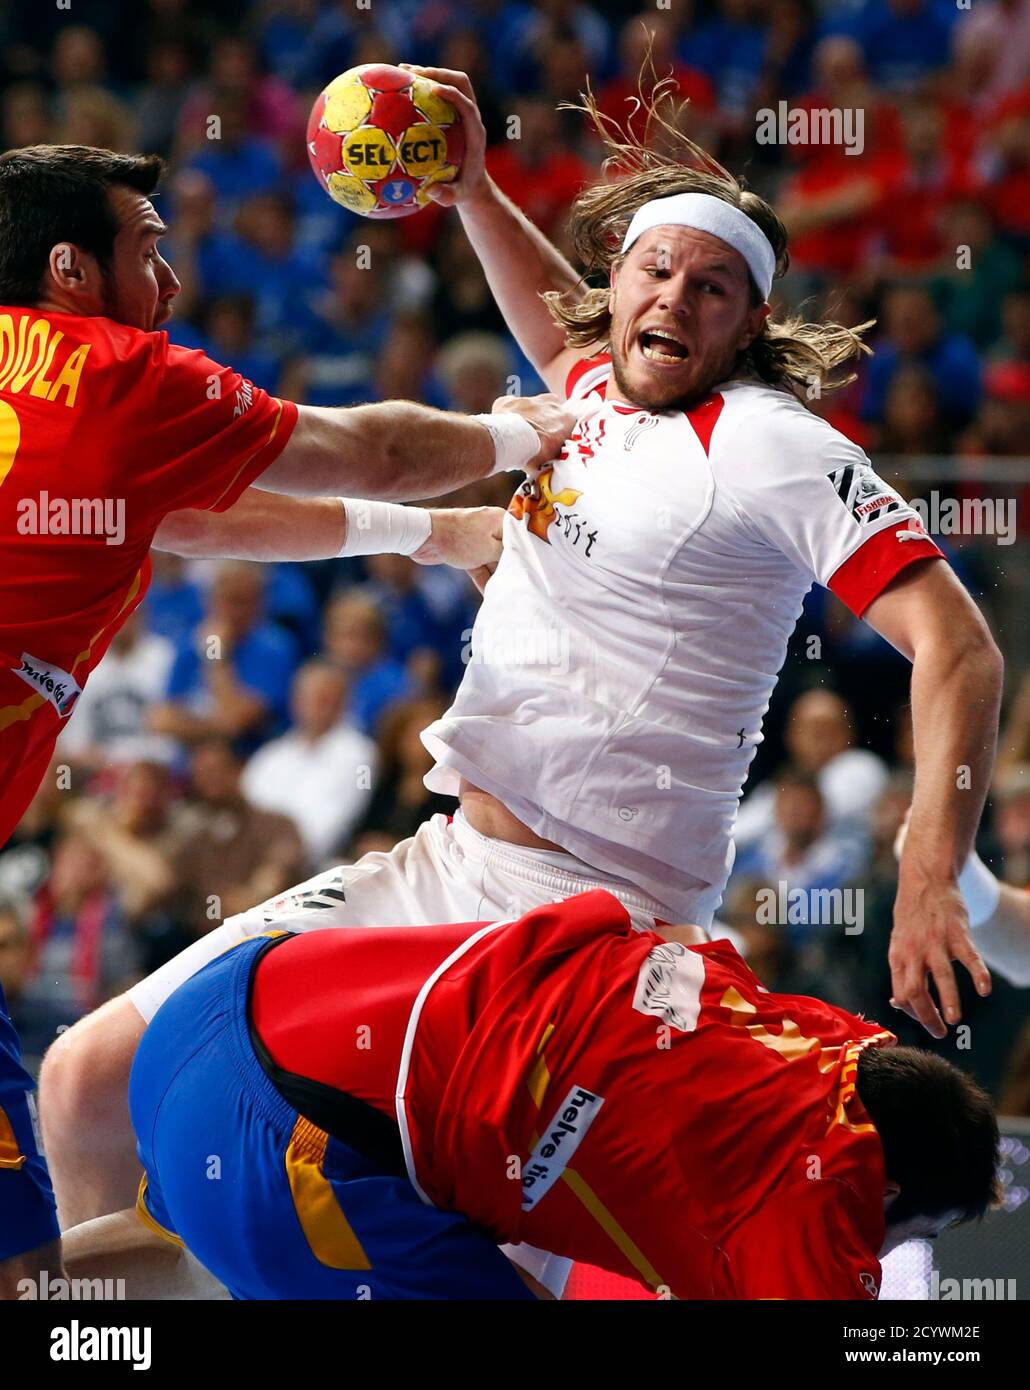 Denmark's Mikkel Hansen (R) is challenged by Spain's Gedeon Guardiola (L)  during their Men's Handball World Championship final match at the Palau  Sant Jordi arena in Barcelona January 27, 2013. REUTERS/Gustau Nacarino (